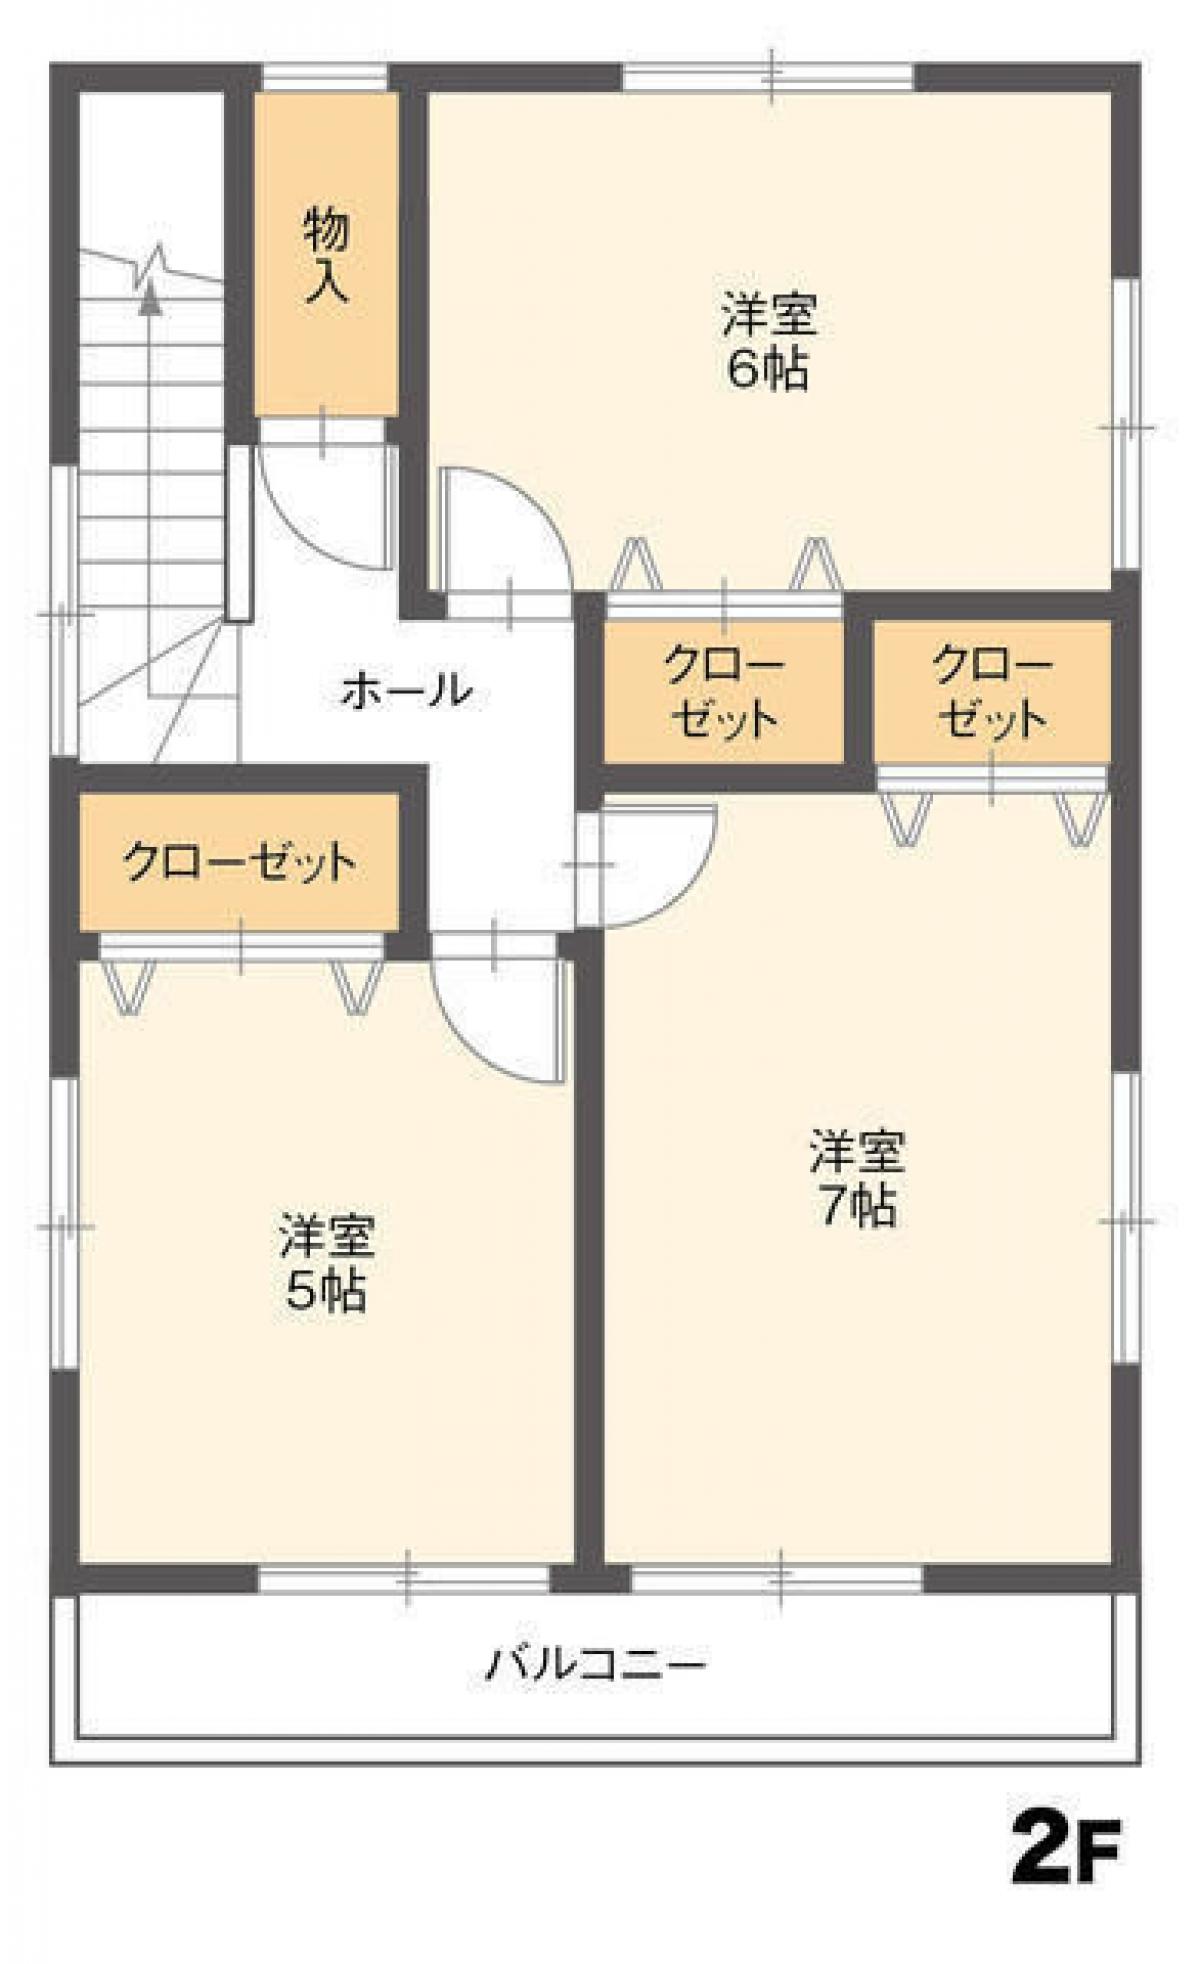 Picture of Home For Sale in Toyohashi Shi, Aichi, Japan